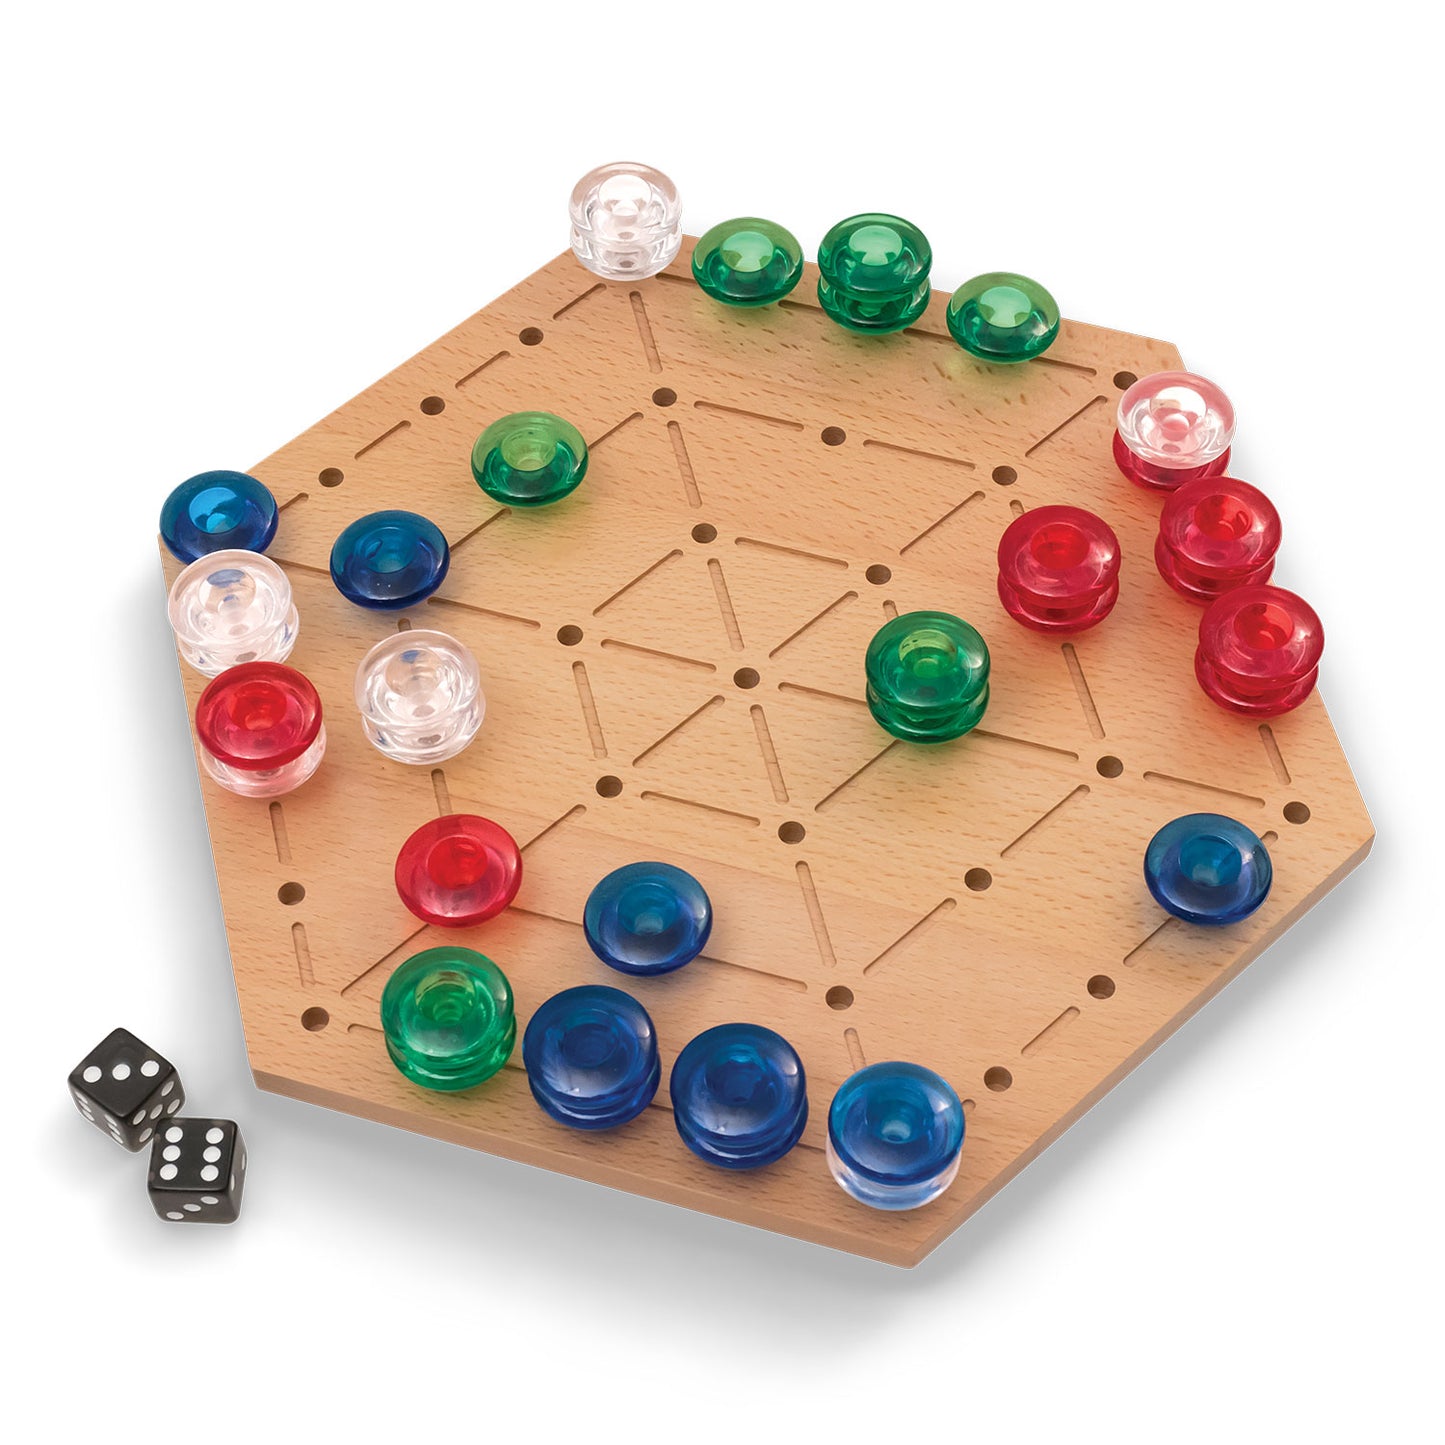 Zone to Zone - Wooden Gameboard Strategy & Dice Game